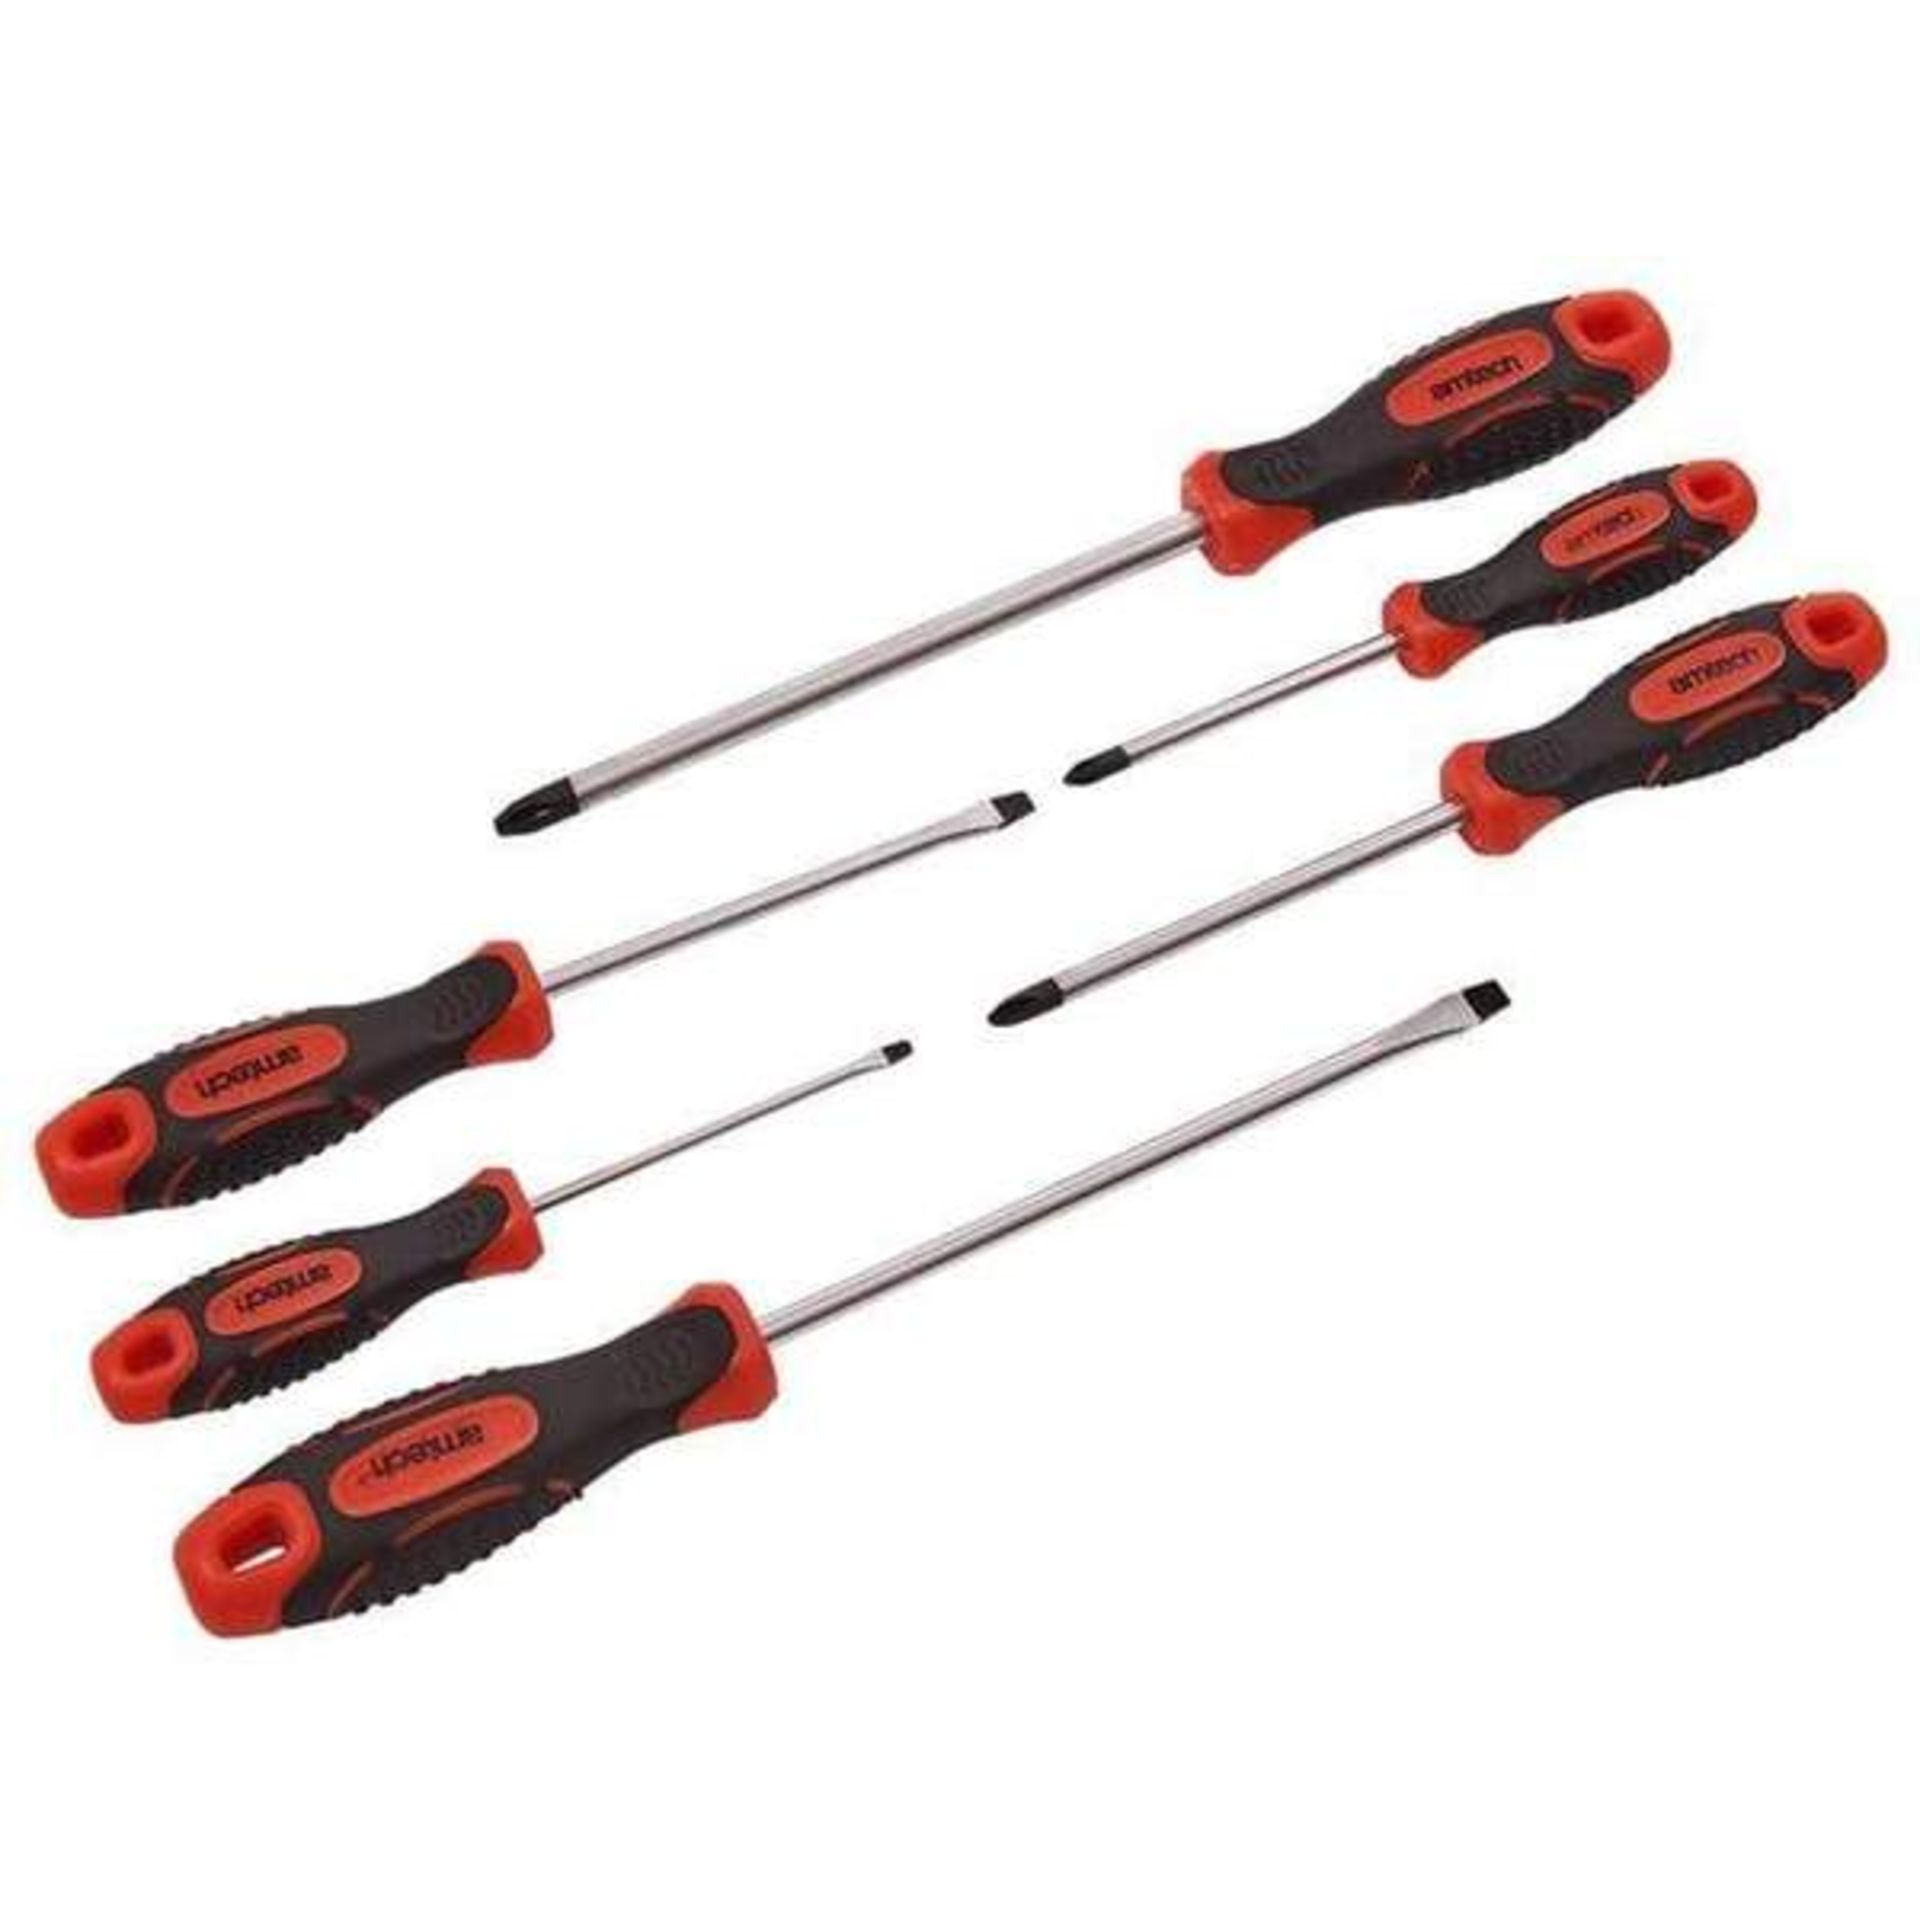 + VAT Brand New Six Piece Screwdriver Set - 3 Pieces Philips And Three Pieces Slotted Screwdrivers